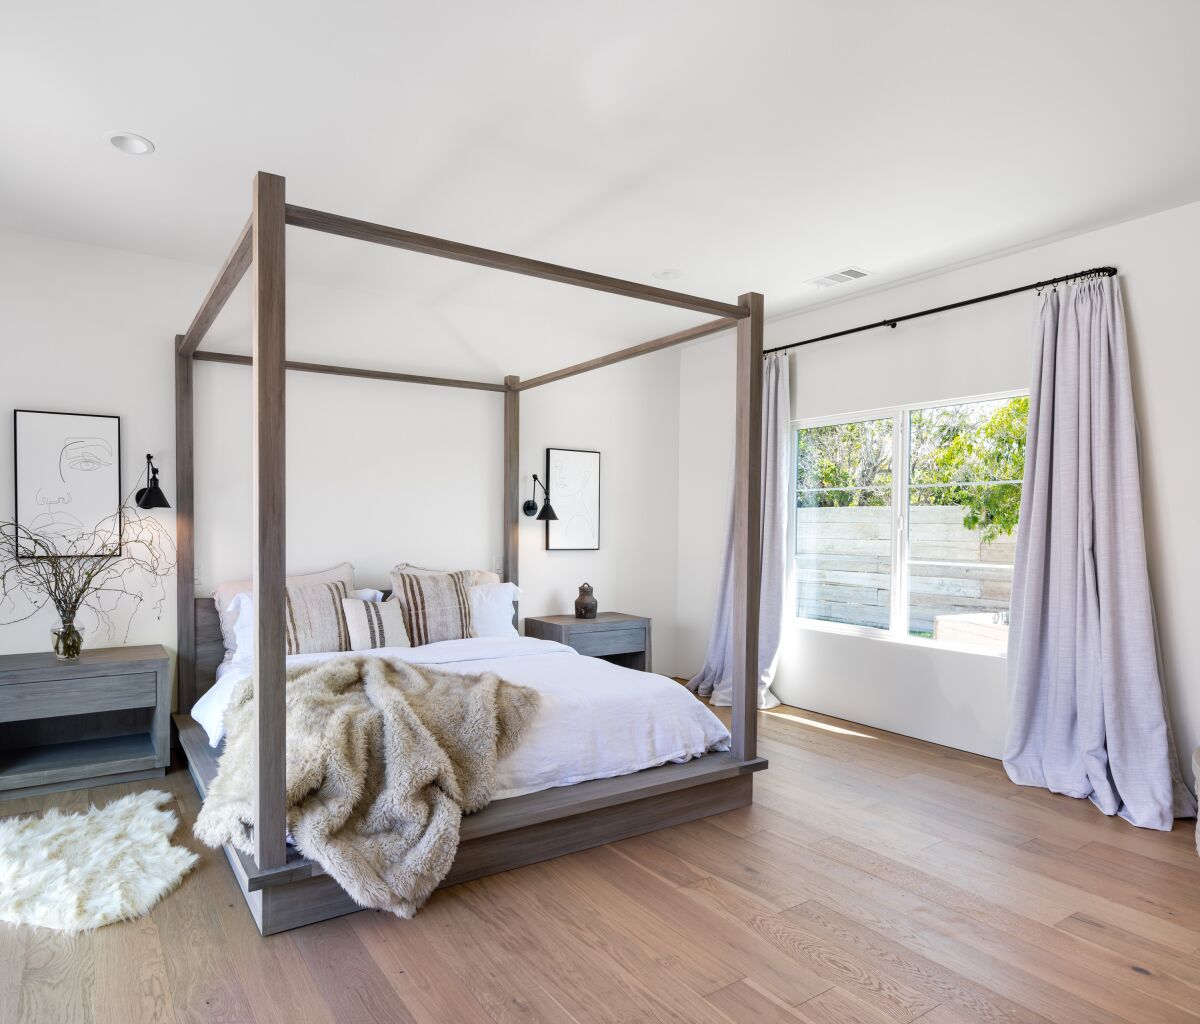 The master bedroom gets a lot of natural light from the large window to the side yard. 